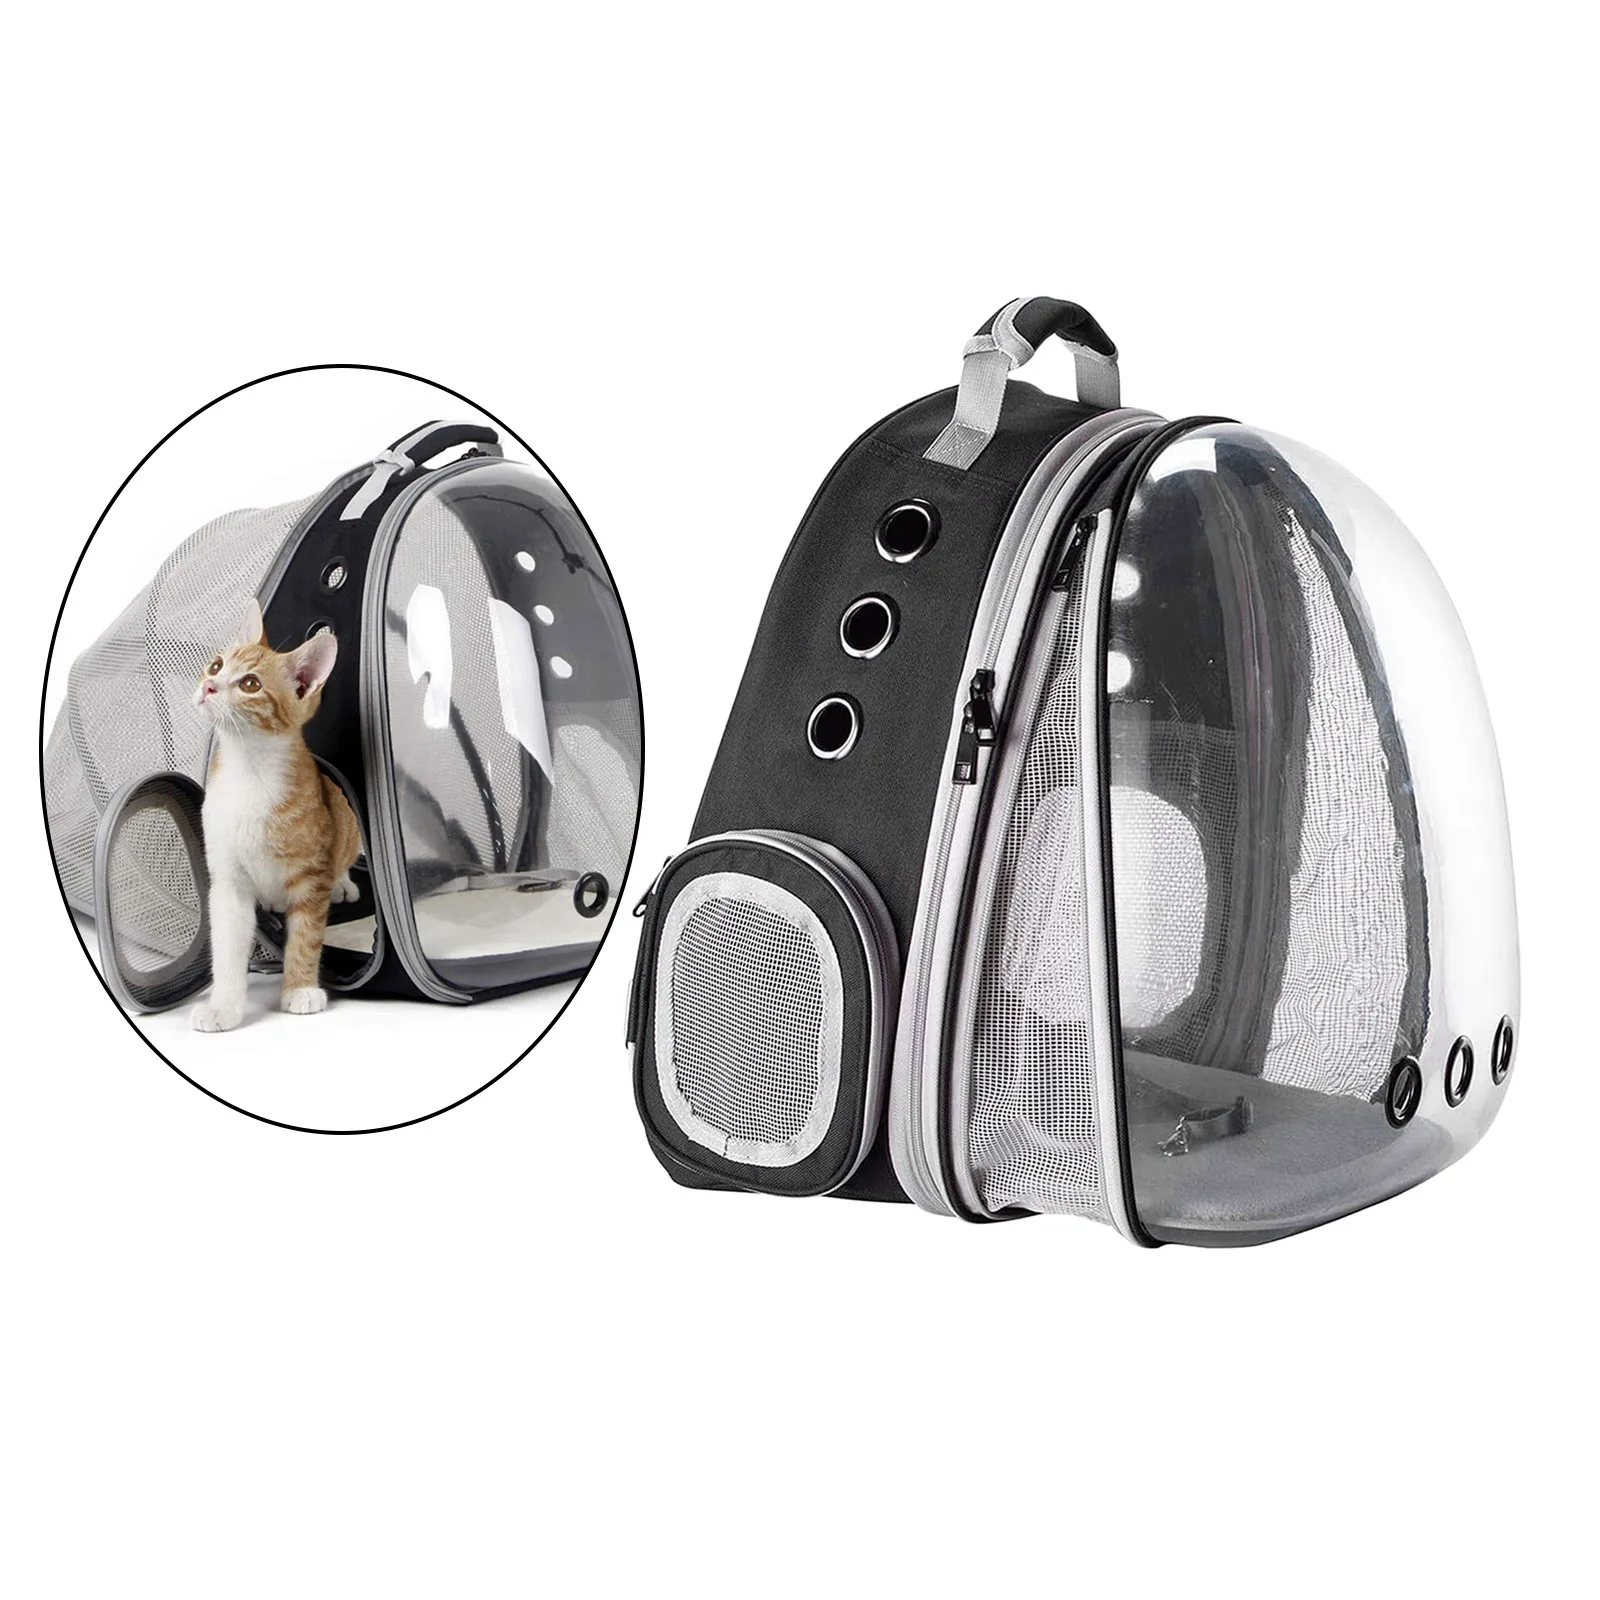 https://ae01.alicdn.com/kf/H5497d1348e894ff39d7687ef6d5e44e8v/Expandable-Cat-Carrier-Bubble-Backpack-Space-Capsule-Clear-Dome-Pet-Travel-Carry-Bag-for-Small-Dog.jpg